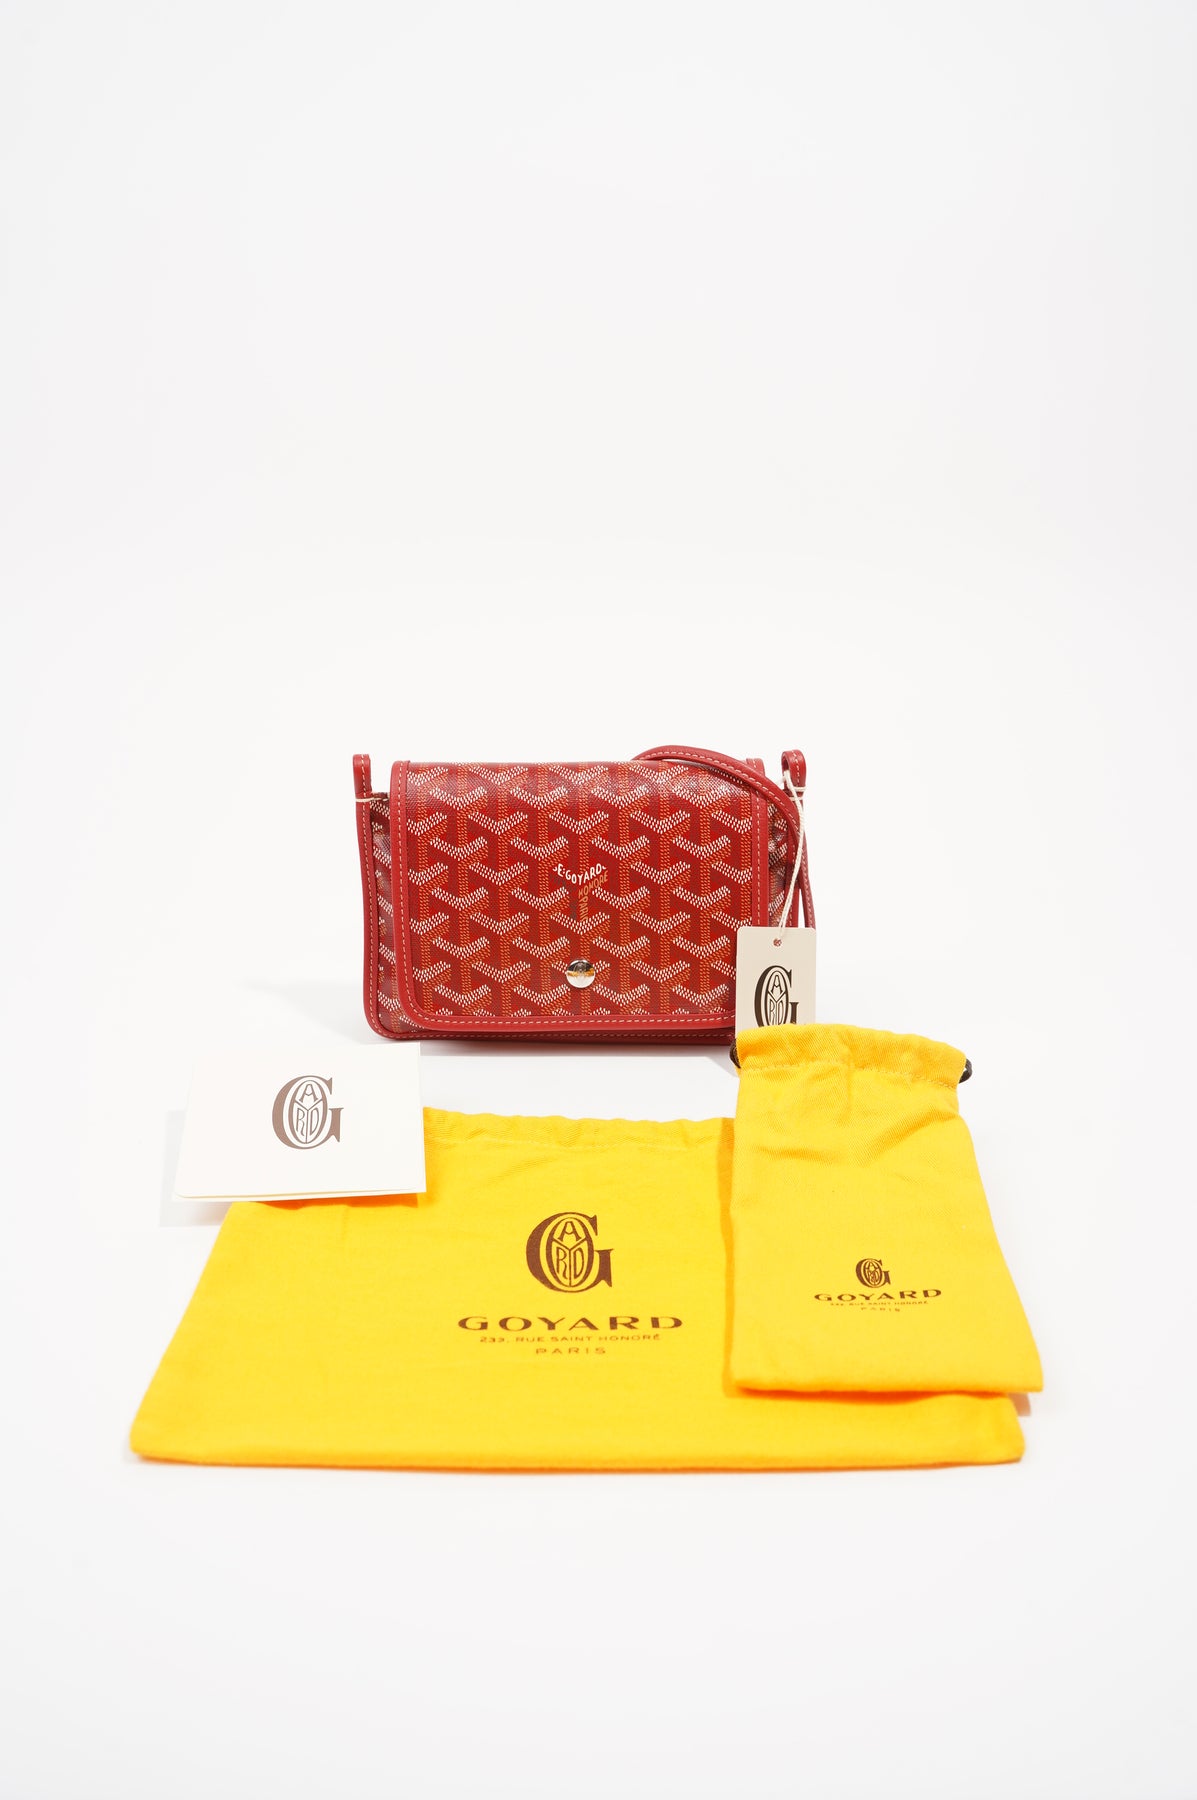 A Detailed Look at the Goyard Plumet Bag, One of the Brand's